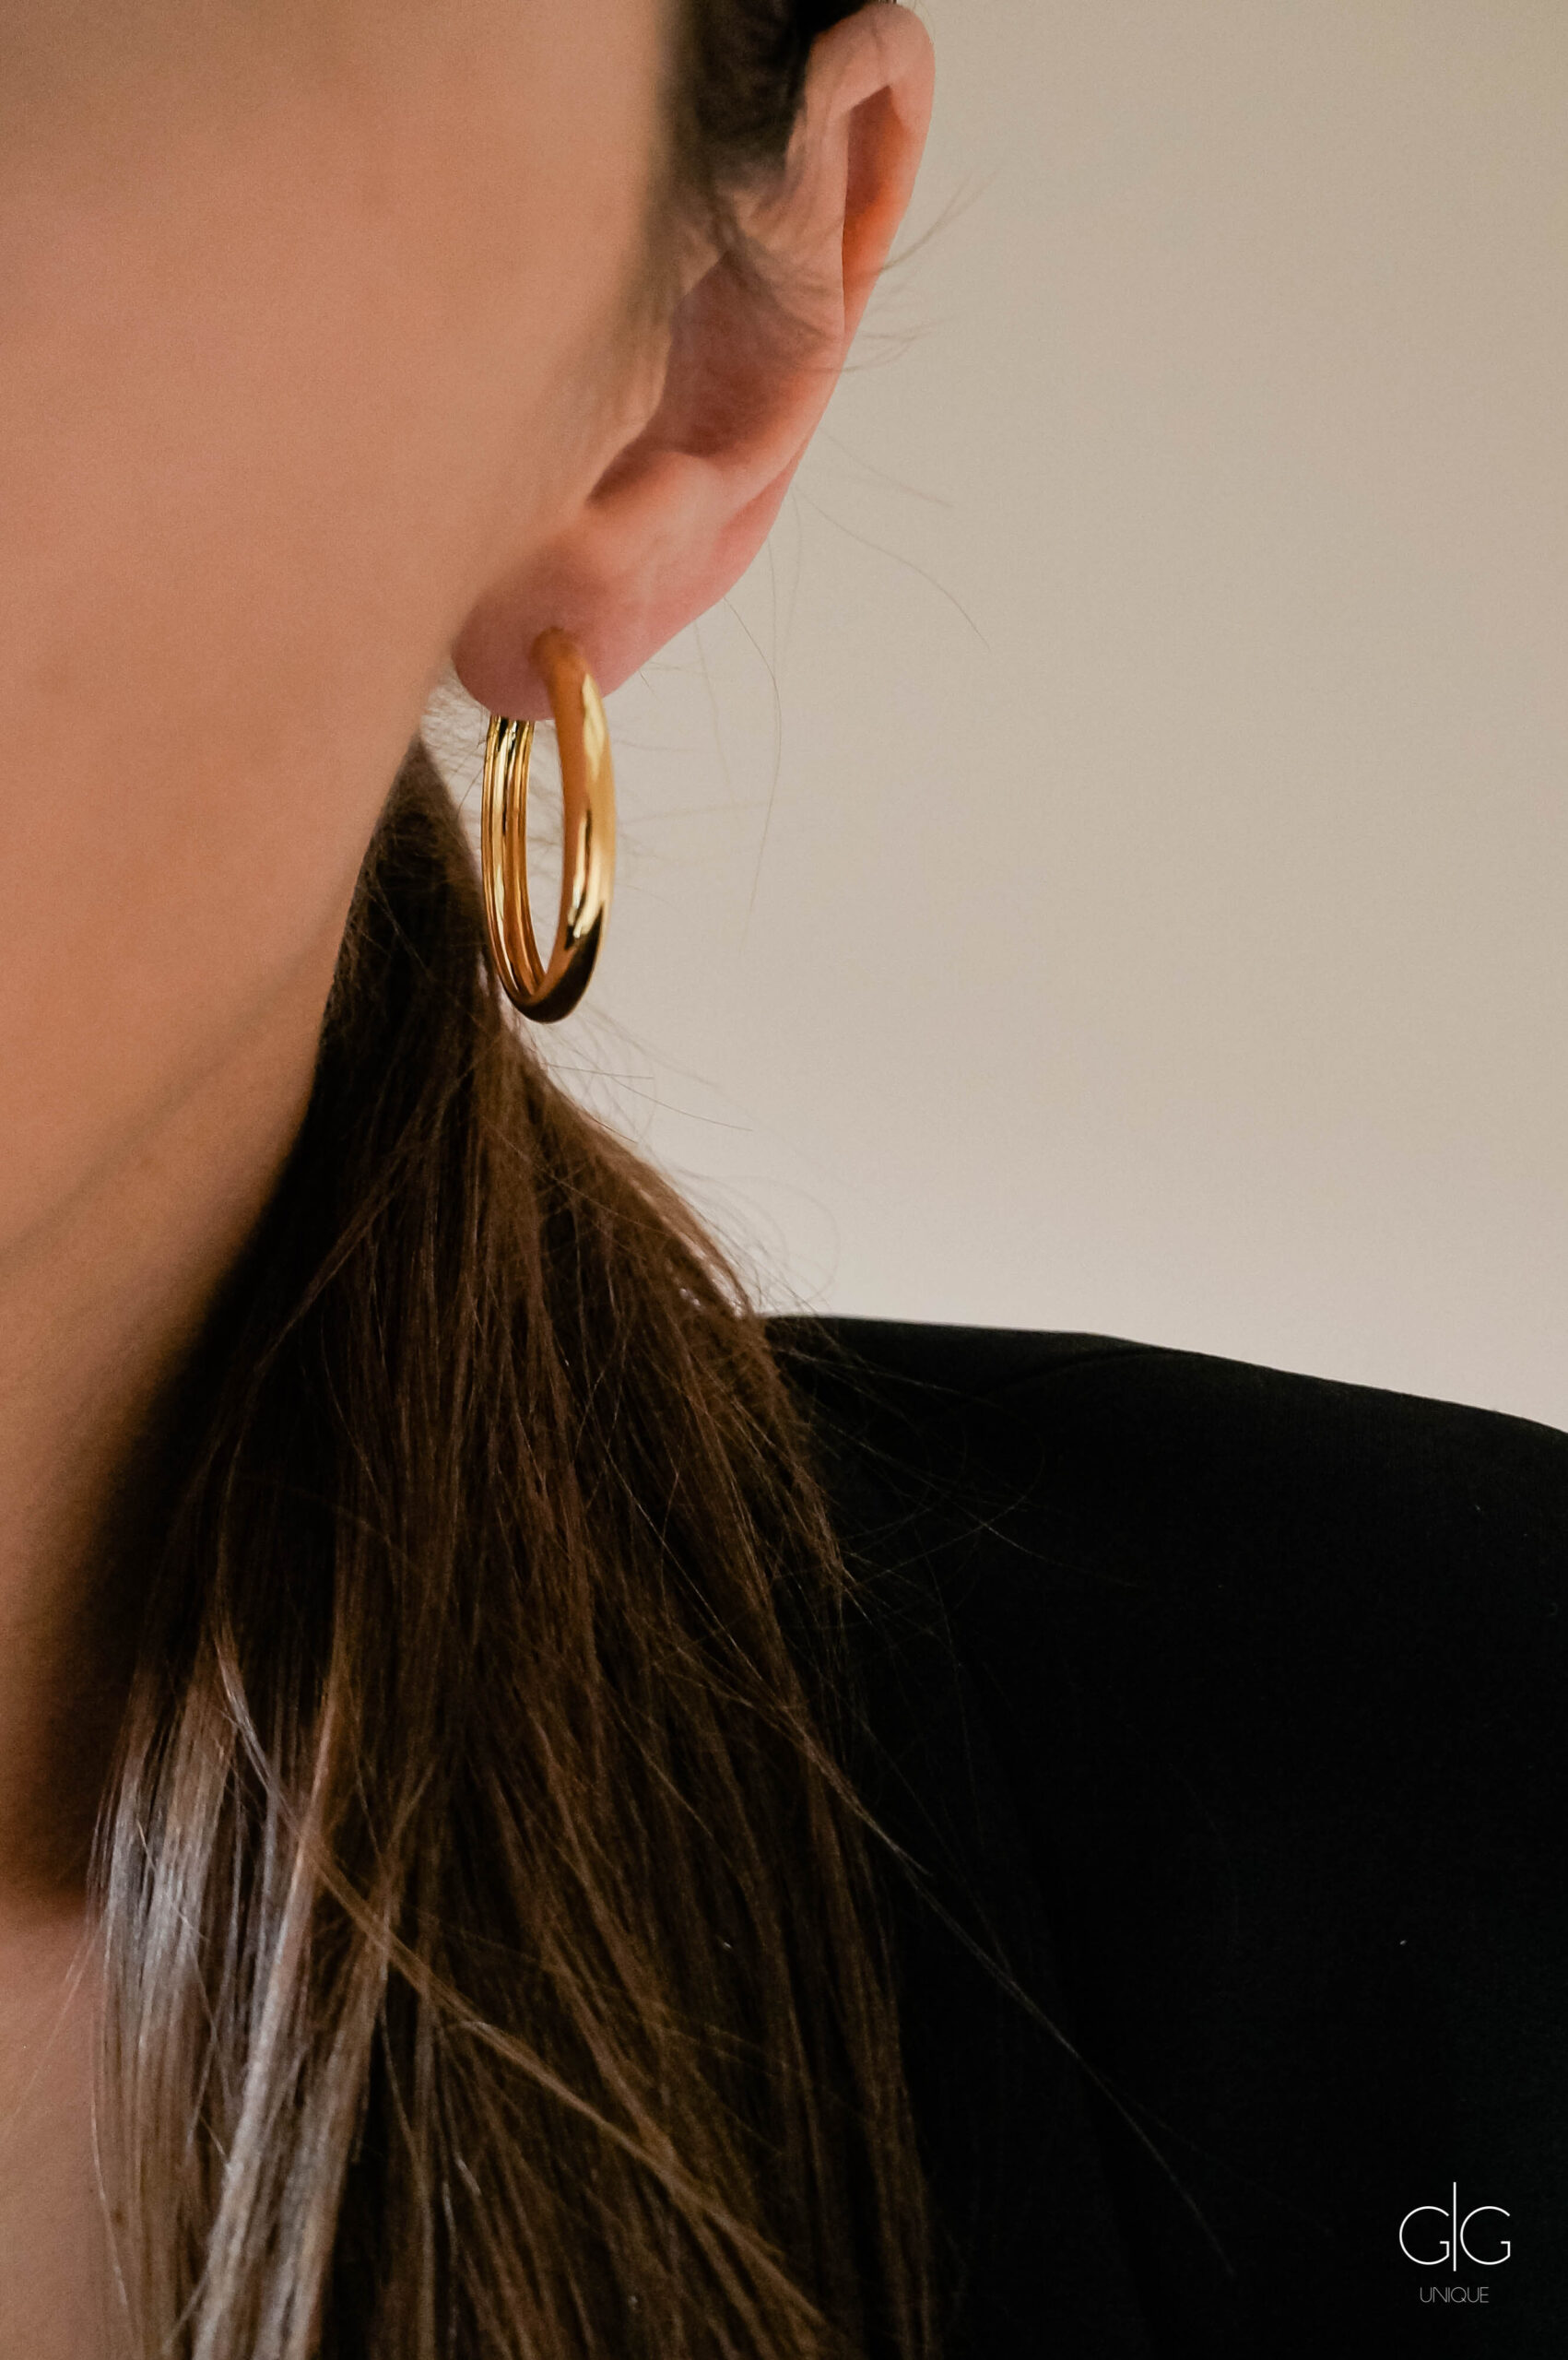 Thick gold-plated sikver hoop earrings